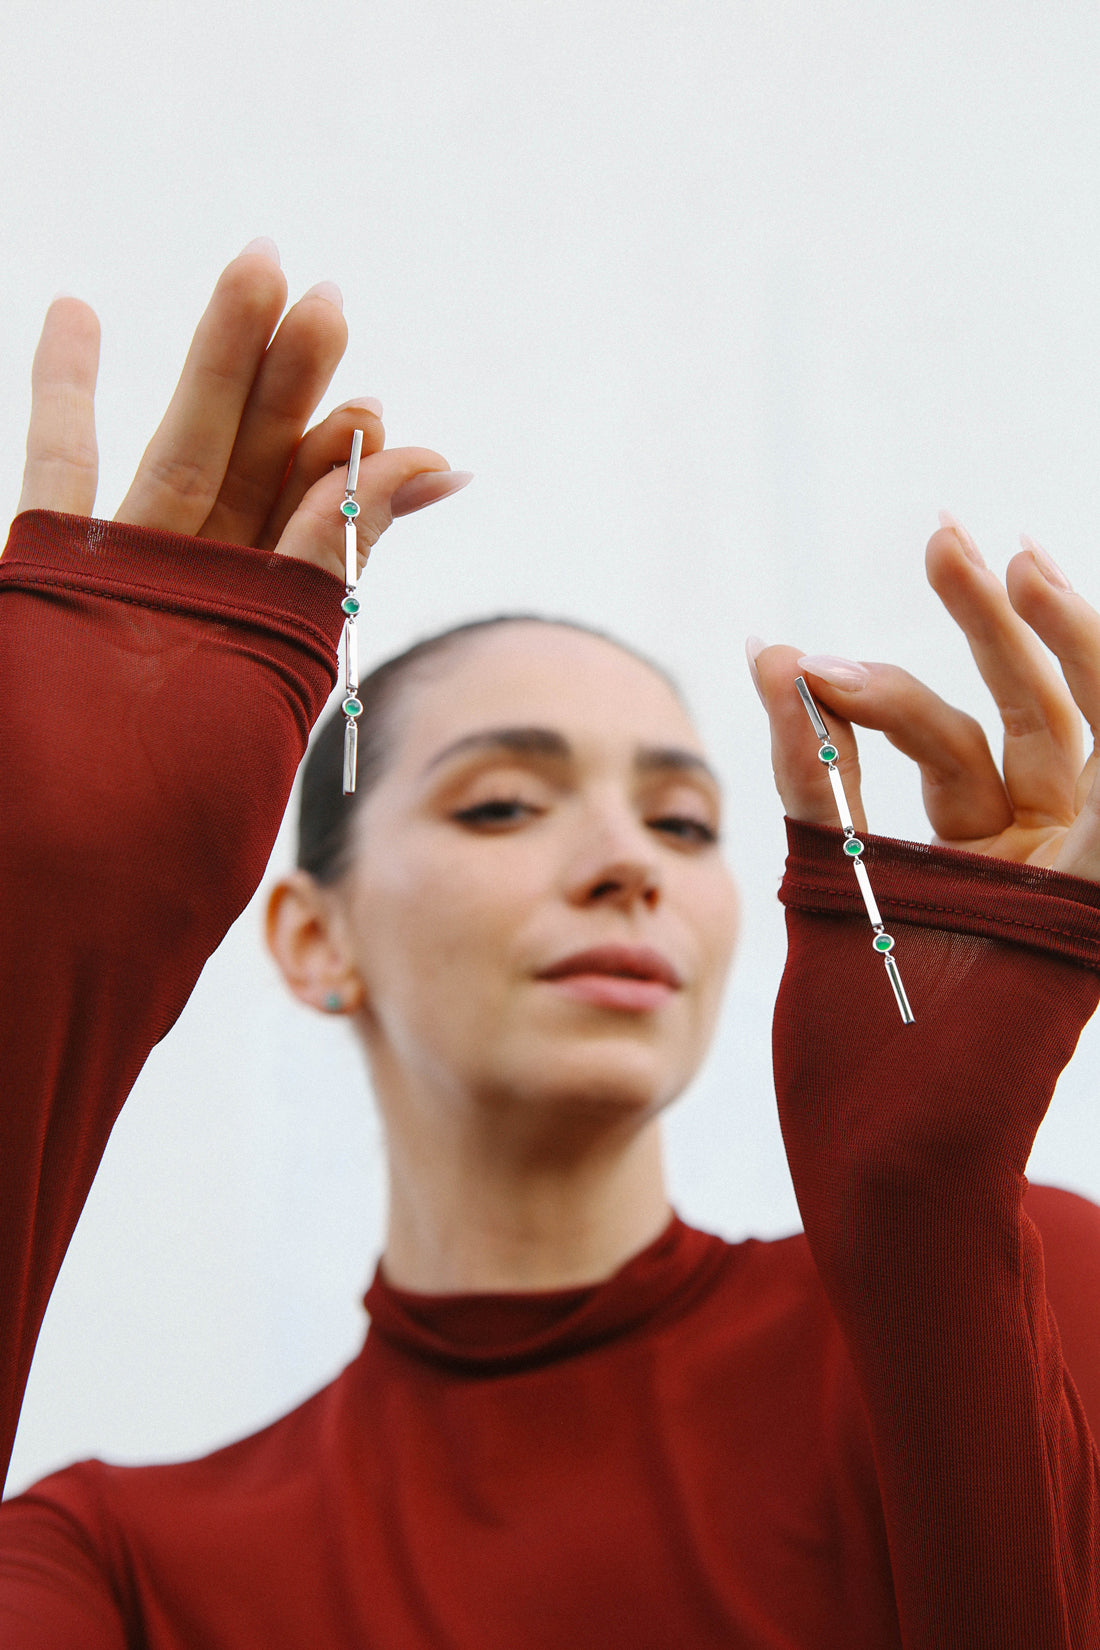 Model wears a red long sleeve top, and holds up a pair of silver earrings featuring three green stones.